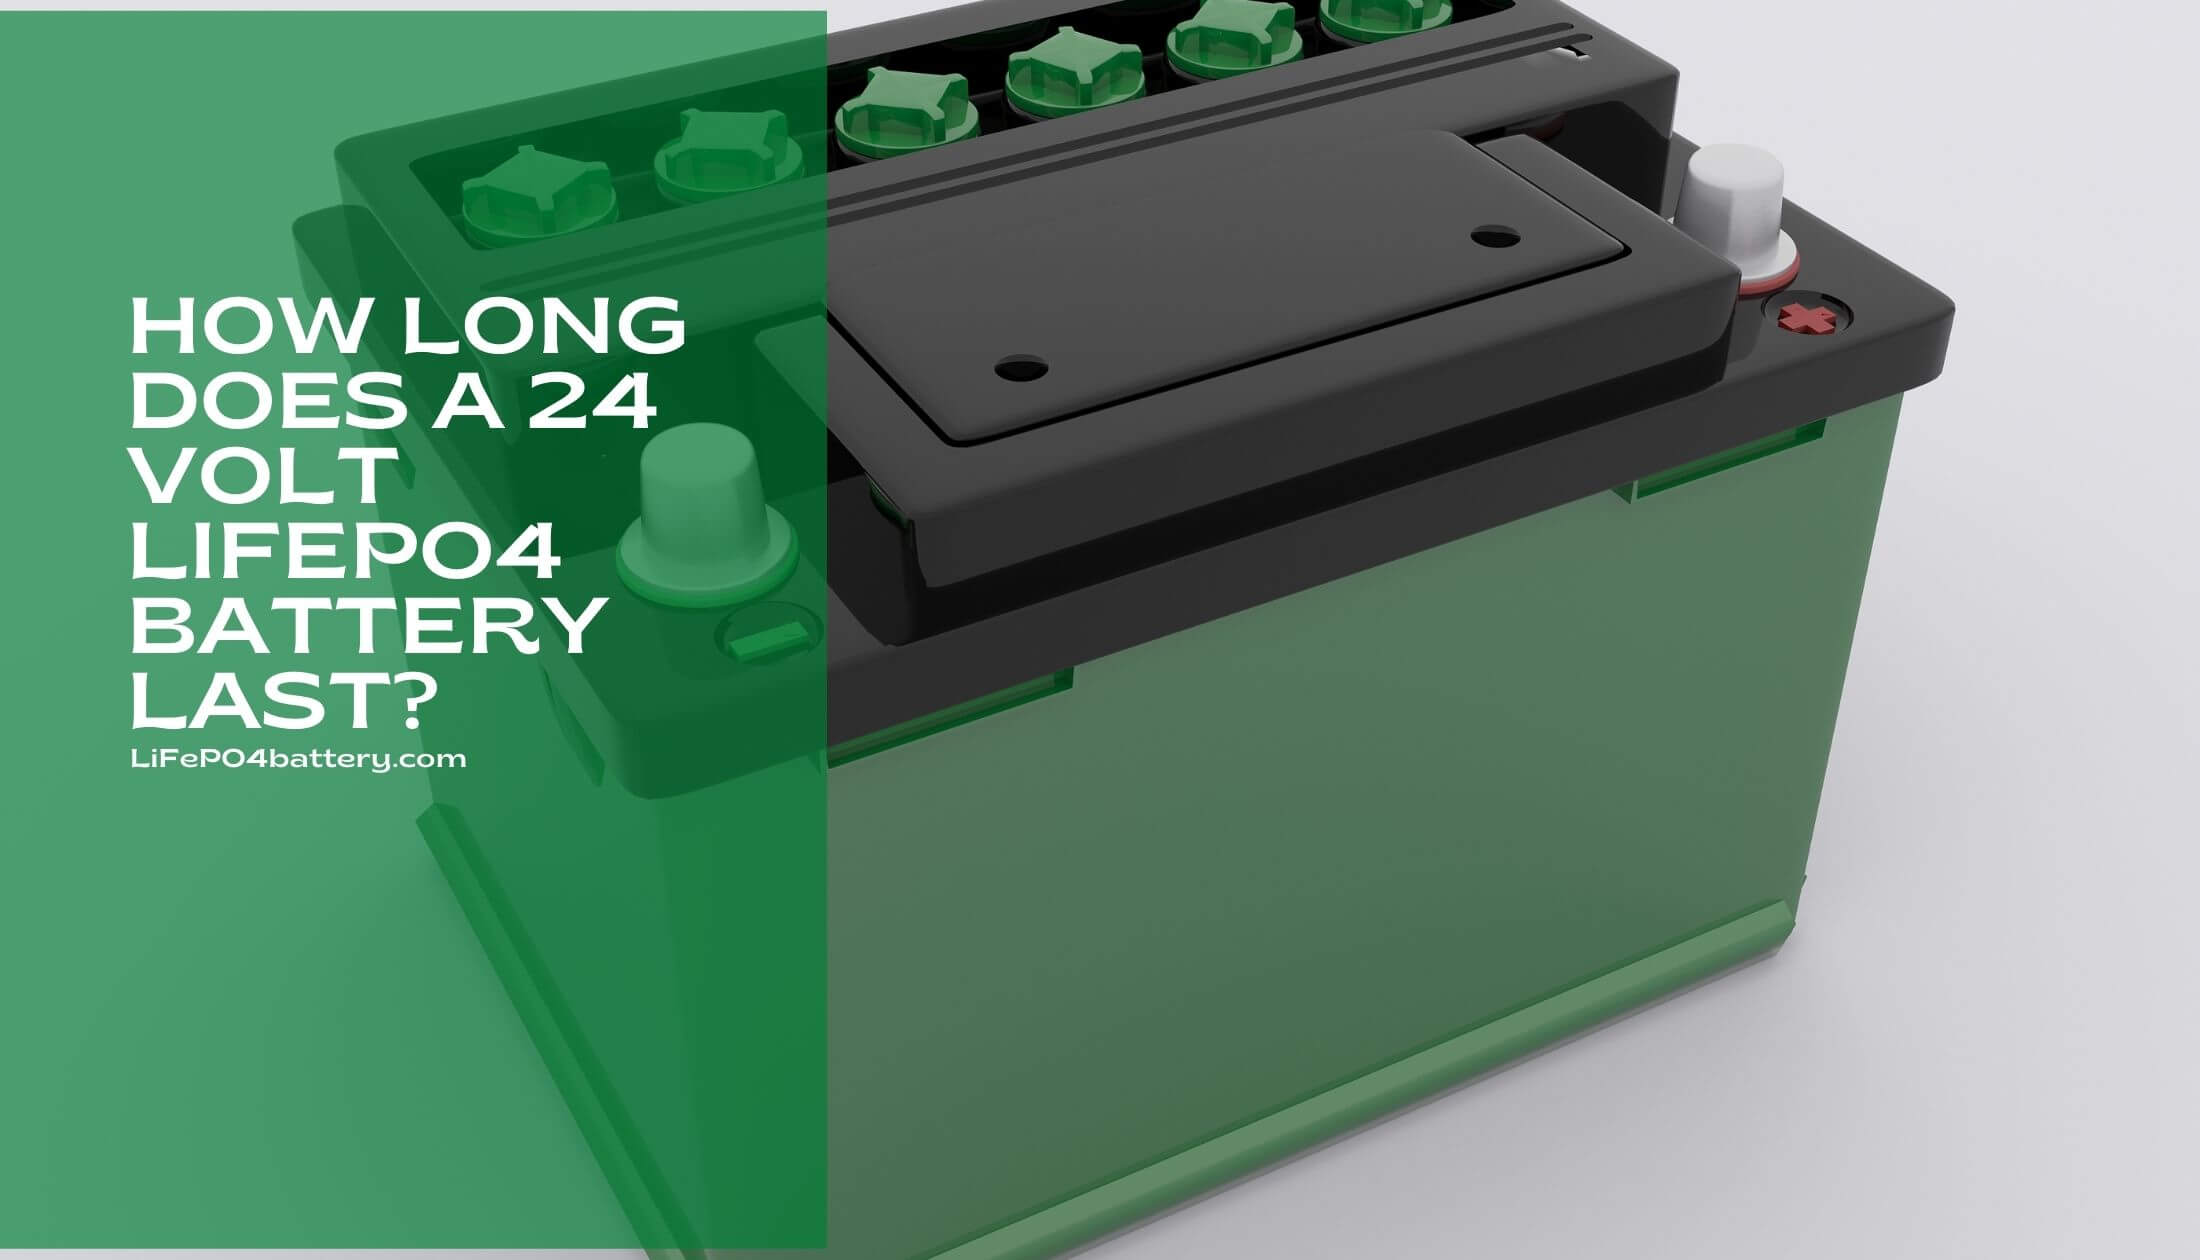 How Long Does A 24 Volt LifePo4 Battery Last (1)